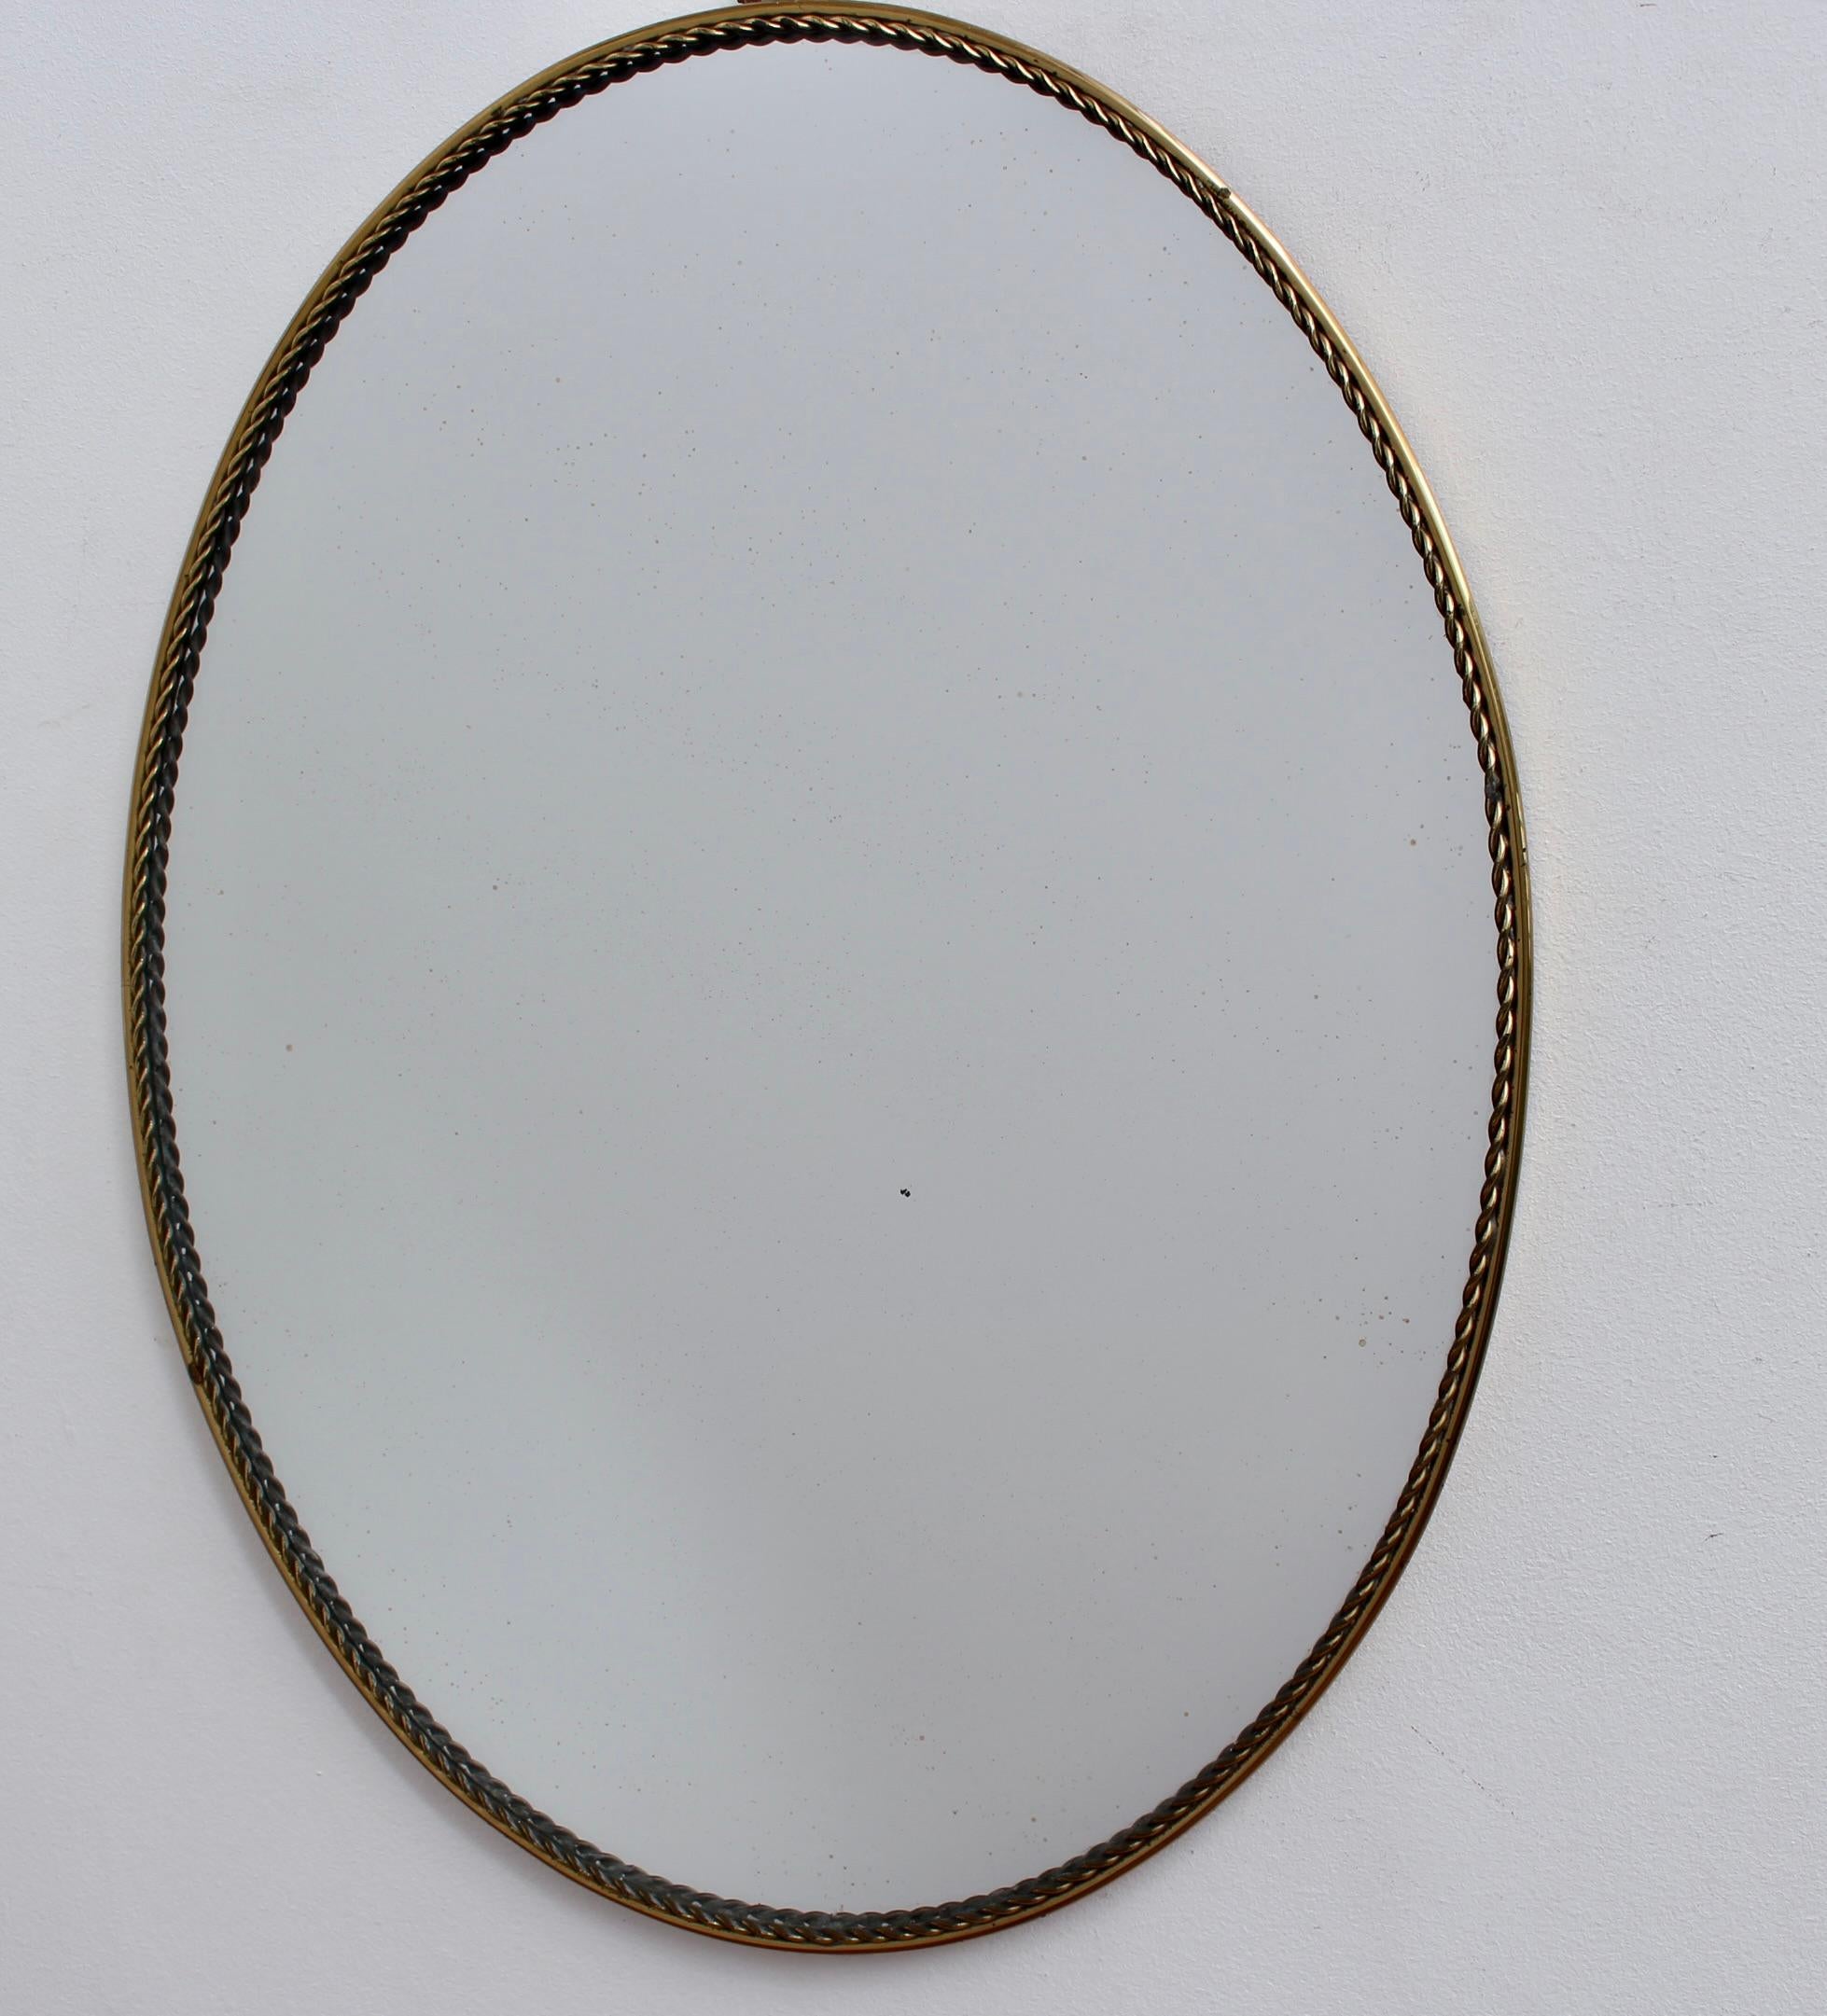 Mid-20th Century Vintage Italian Oval Wall Mirror in Brass Frame (circa 1950s) - Small